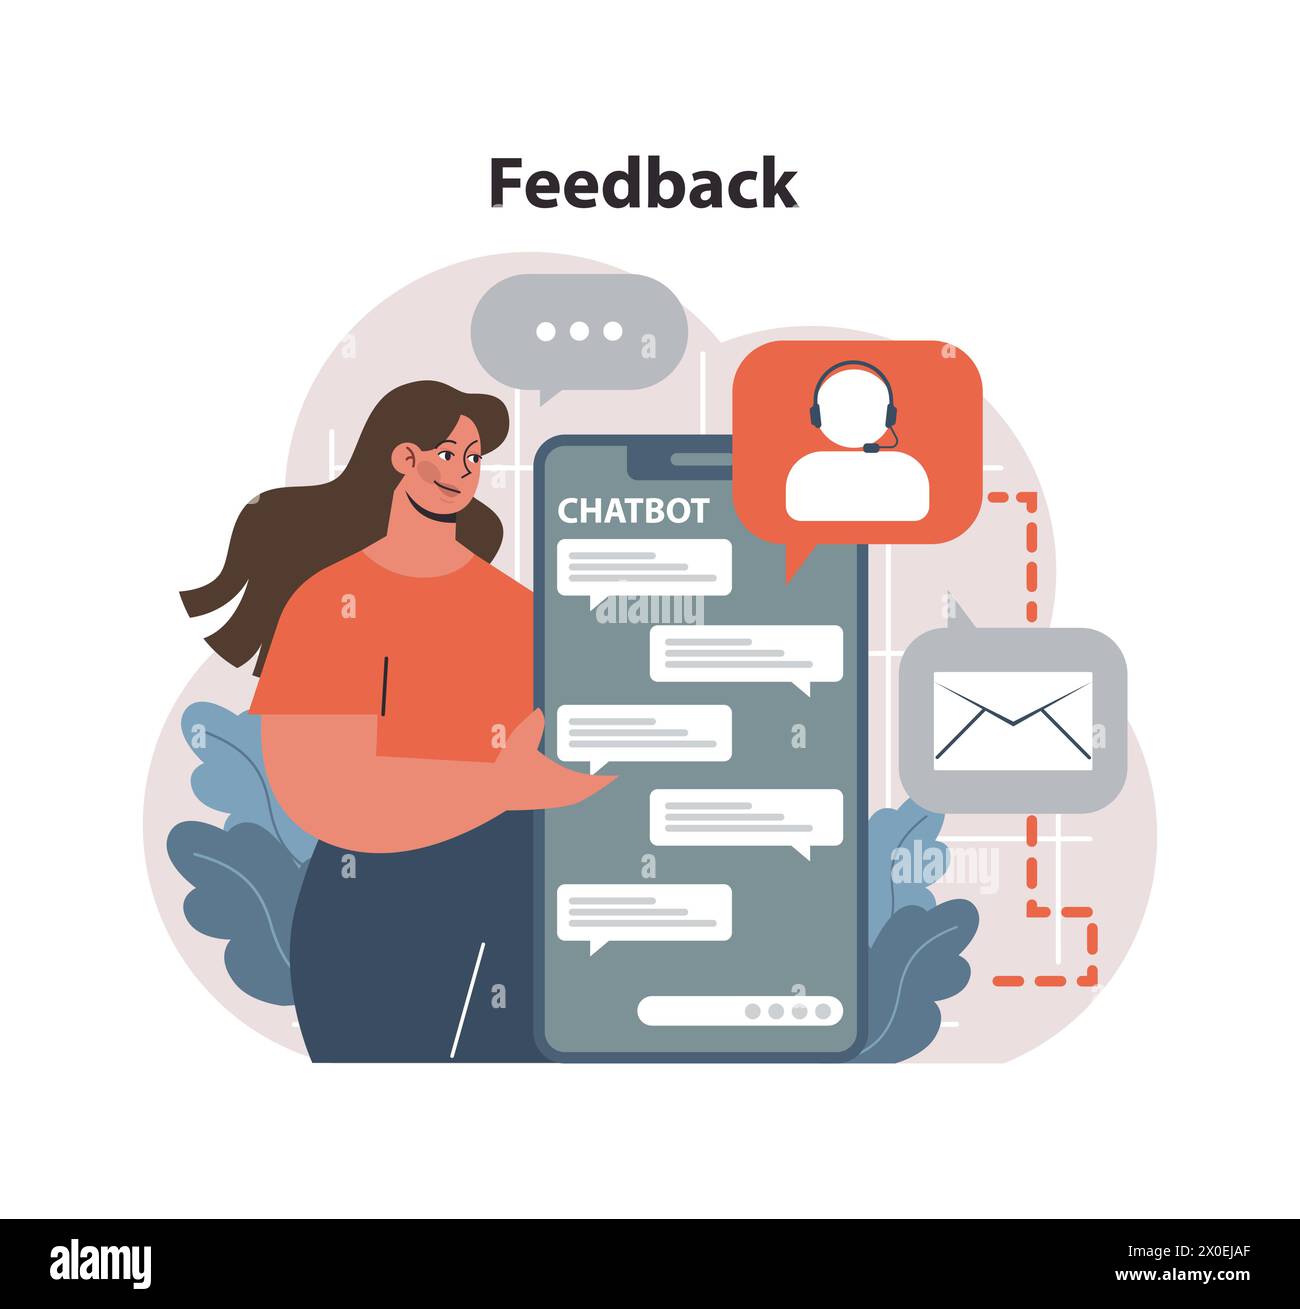 Feedback in digital communication concept. Woman interacts with chatbot while sharing opinions. Efficient customer service meets user experience. Flat vector illustration Stock Vector